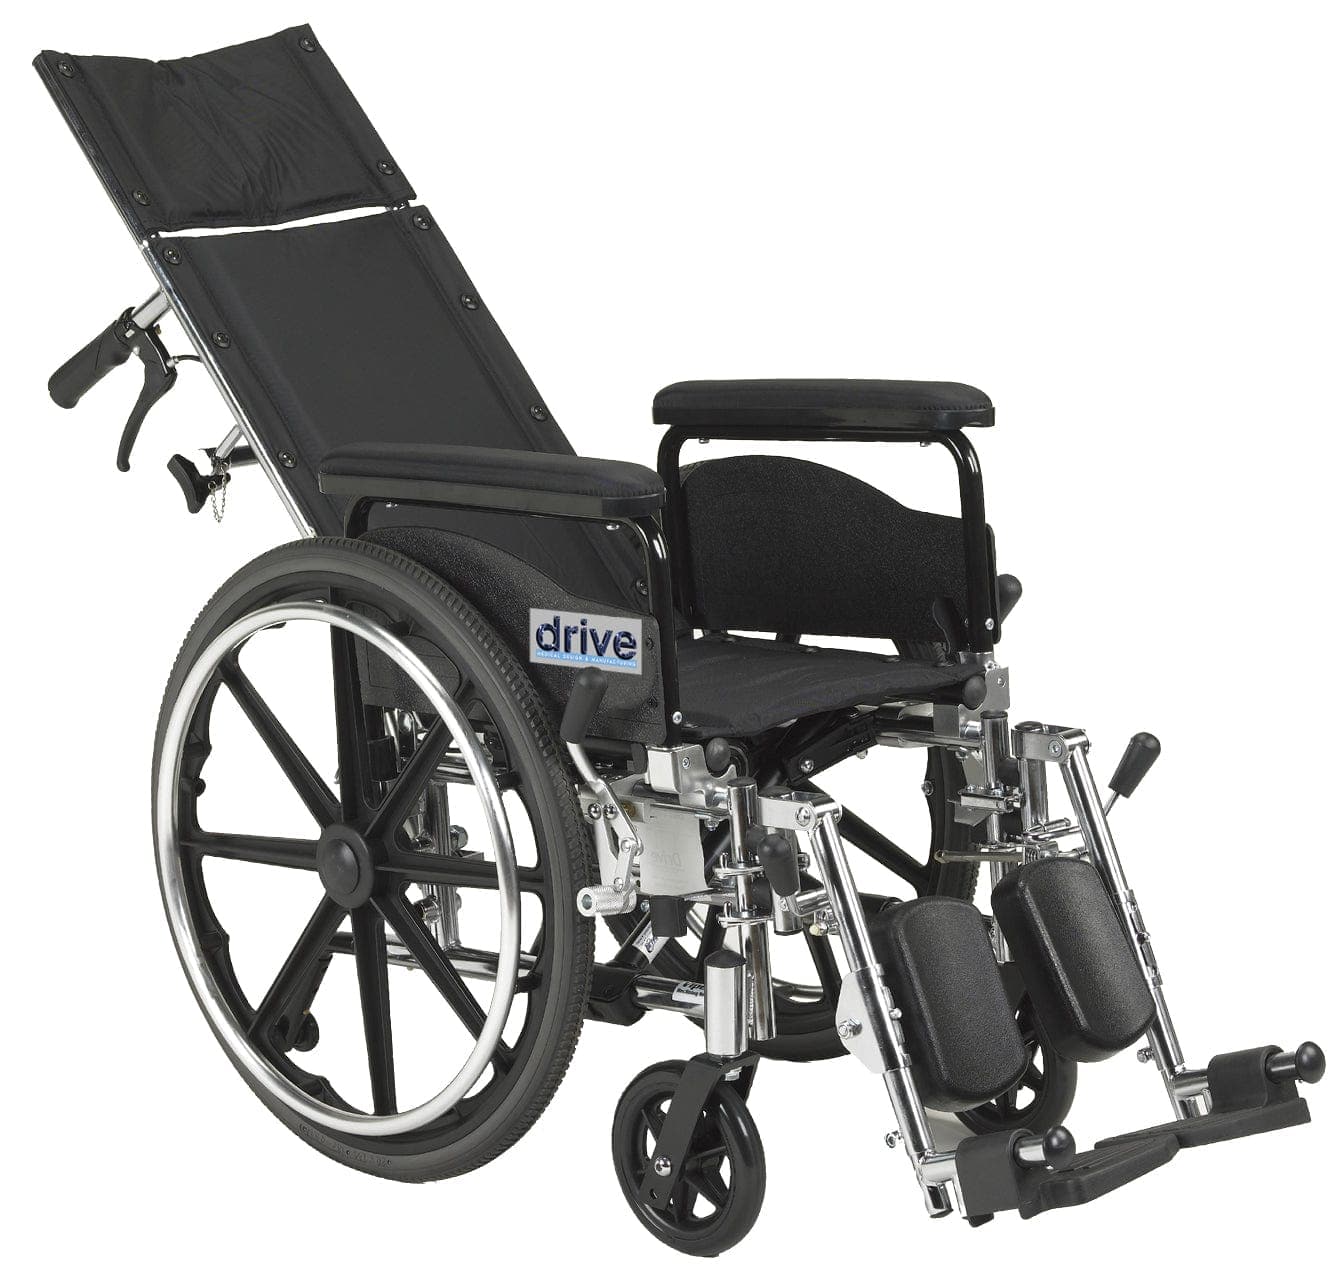 Drive Medical Wheelchairs Full Arms / 20" Seat Drive Medical Viper Plus GT Full Reclining Wheelchair